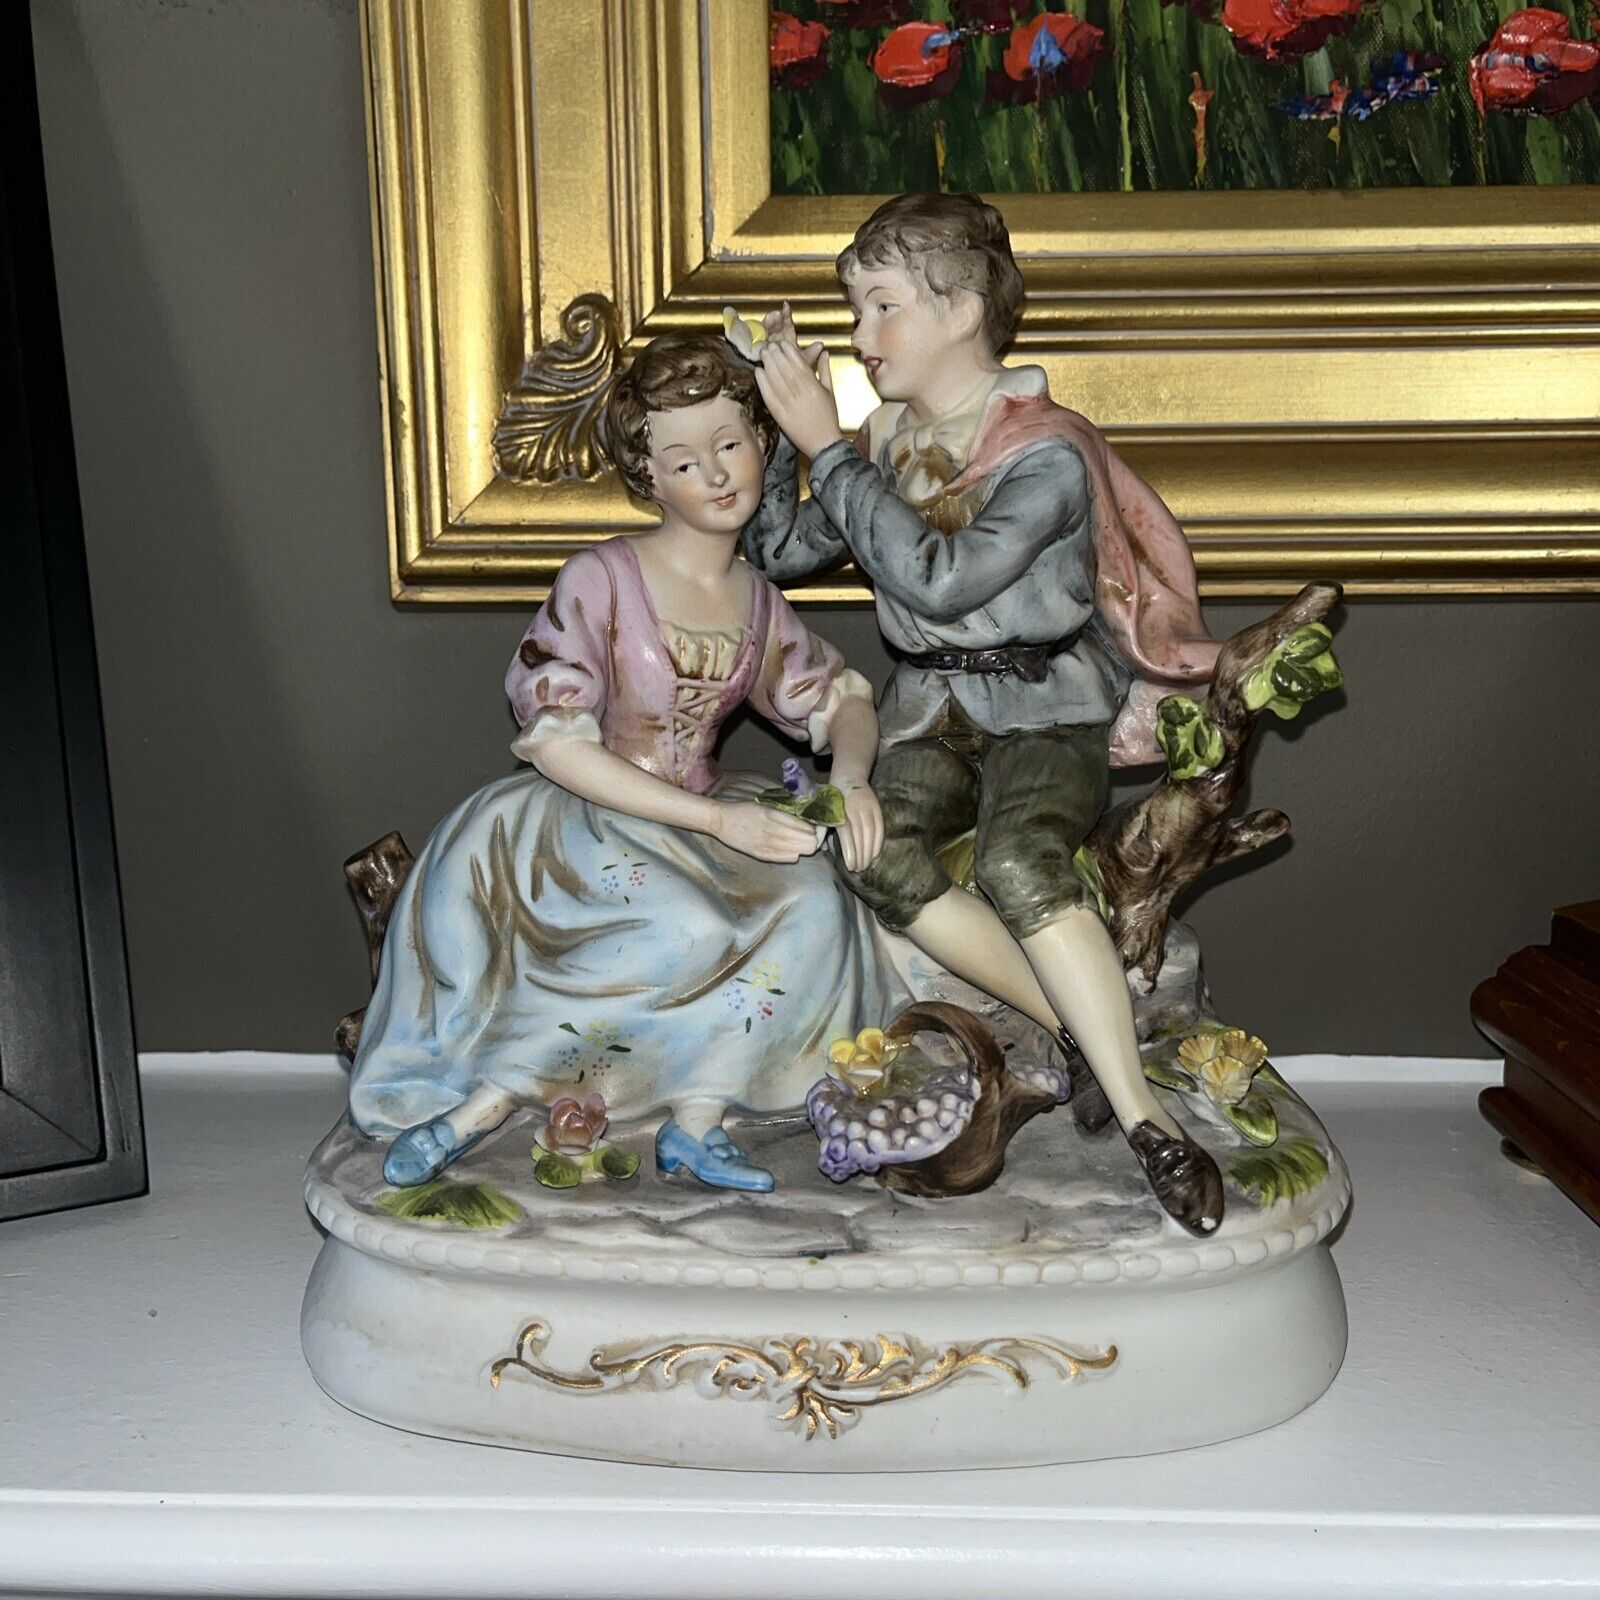 Lenwile Ardalt Vintage Courting Couple Bisque Figurine Grannycore Cottage Chic